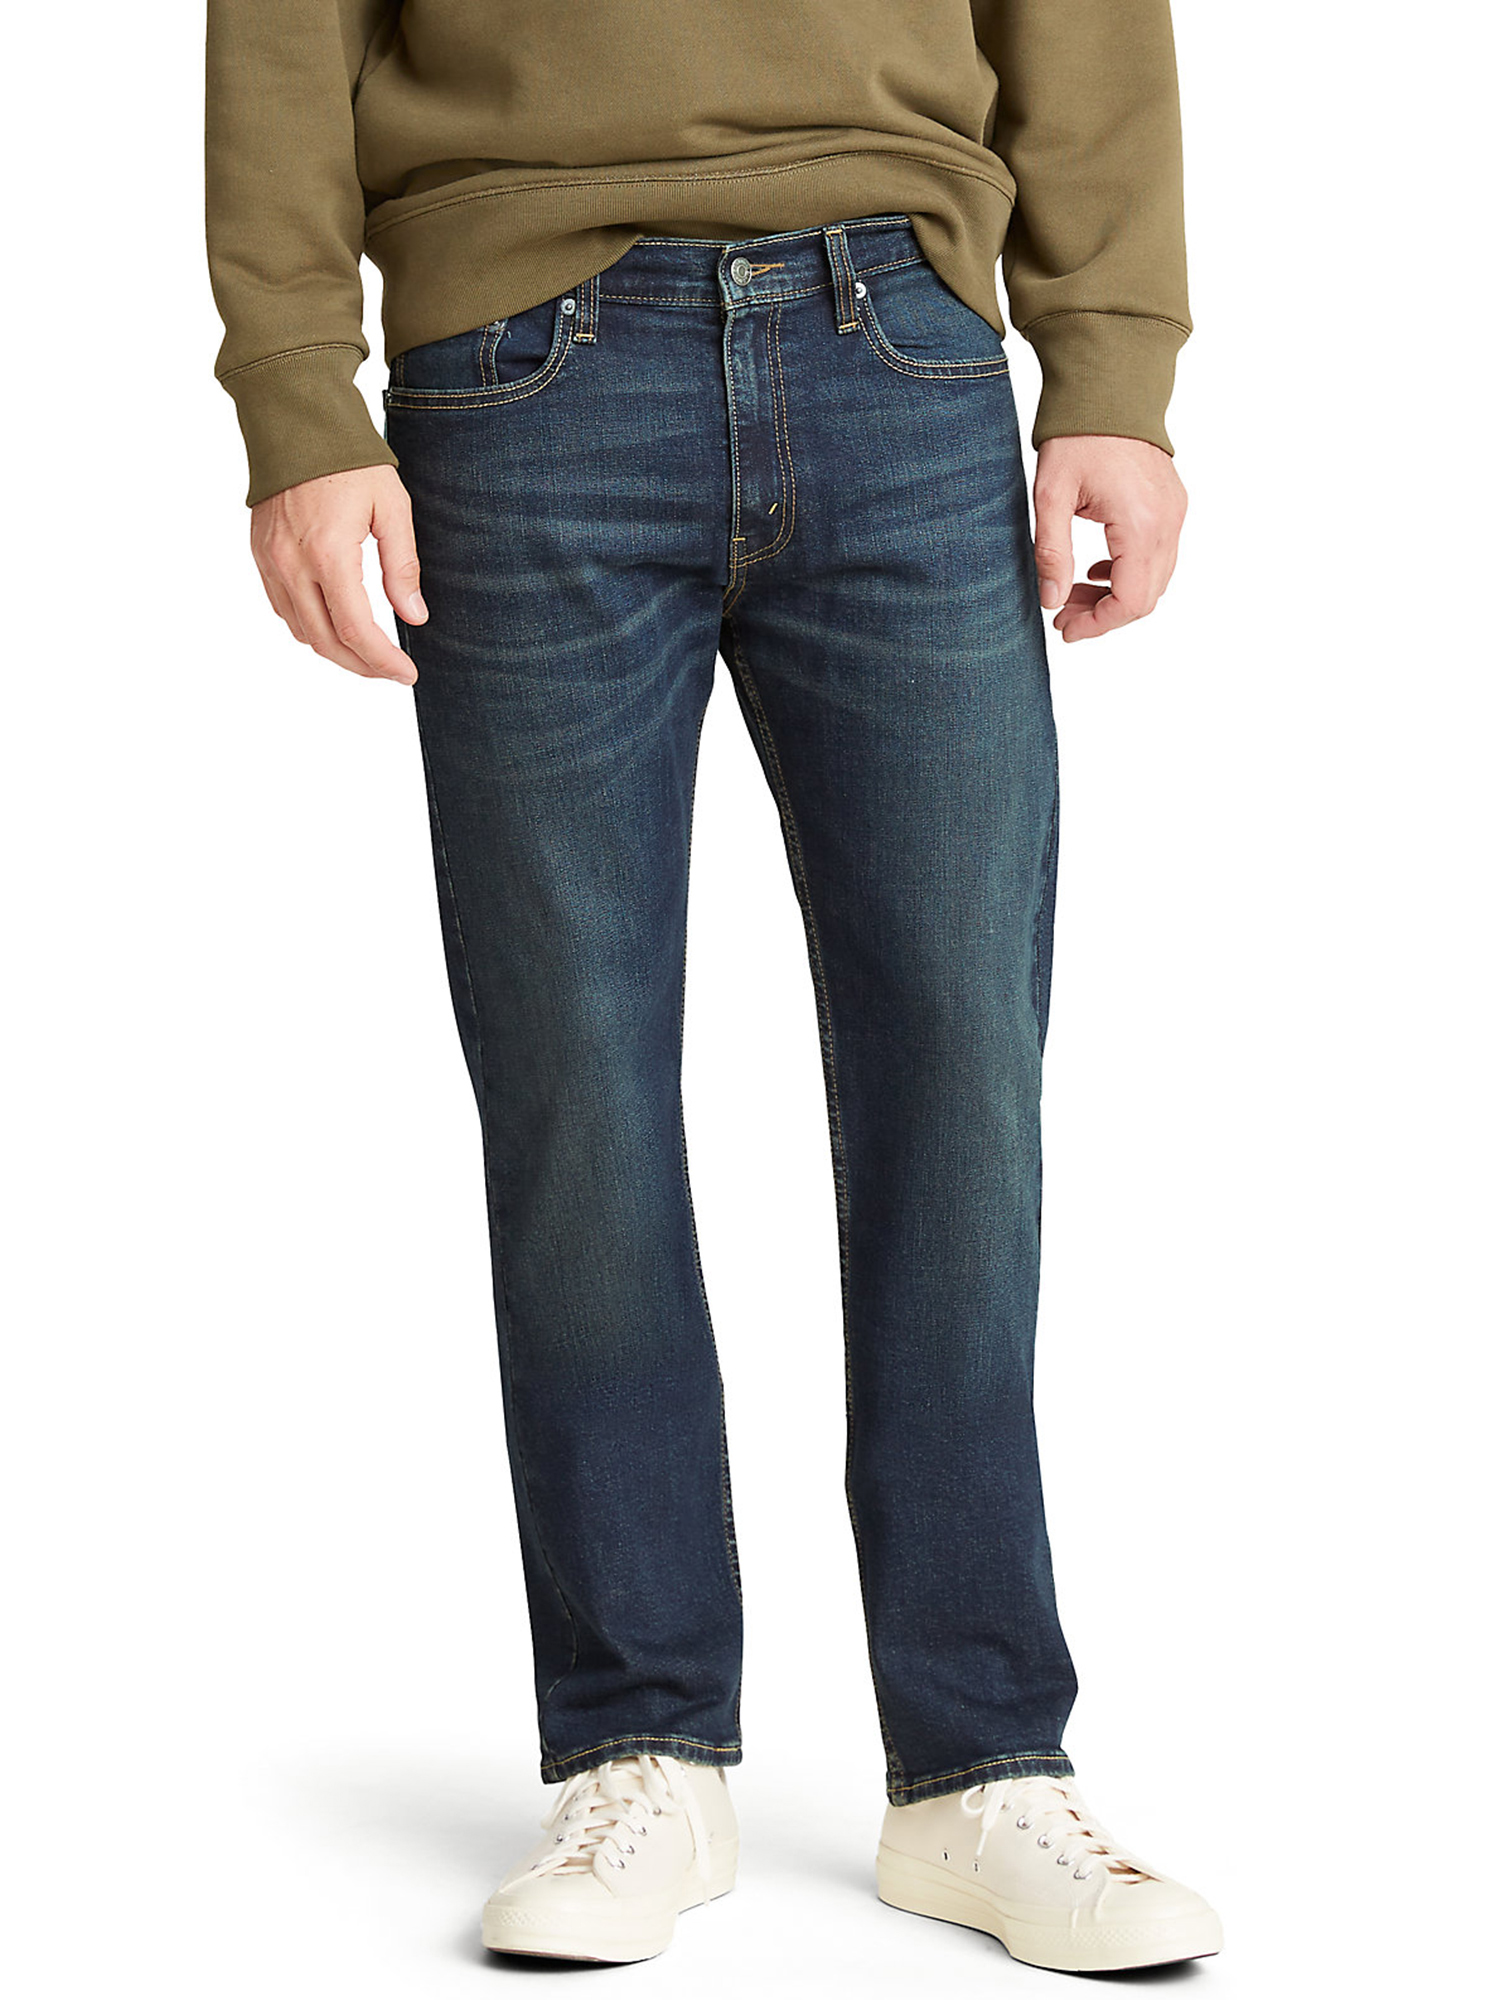 Signature by Levi Strauss & Co. Men's and Big and Tall Straight Fit Jeans - image 1 of 7